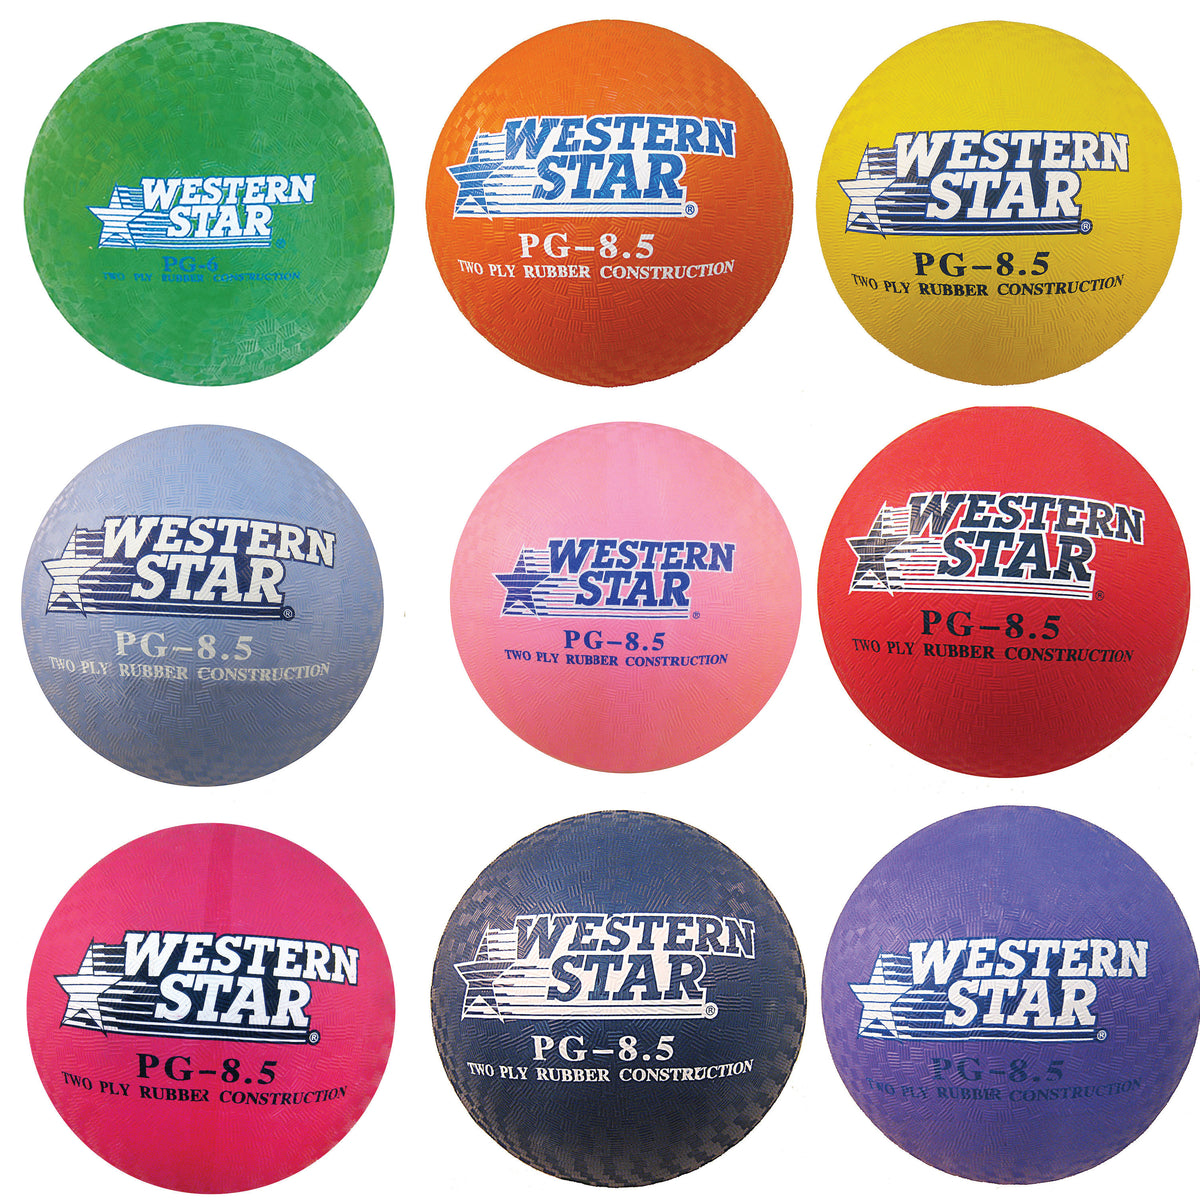 Western Star Premium Official Size Tetherball - Assorted Colors